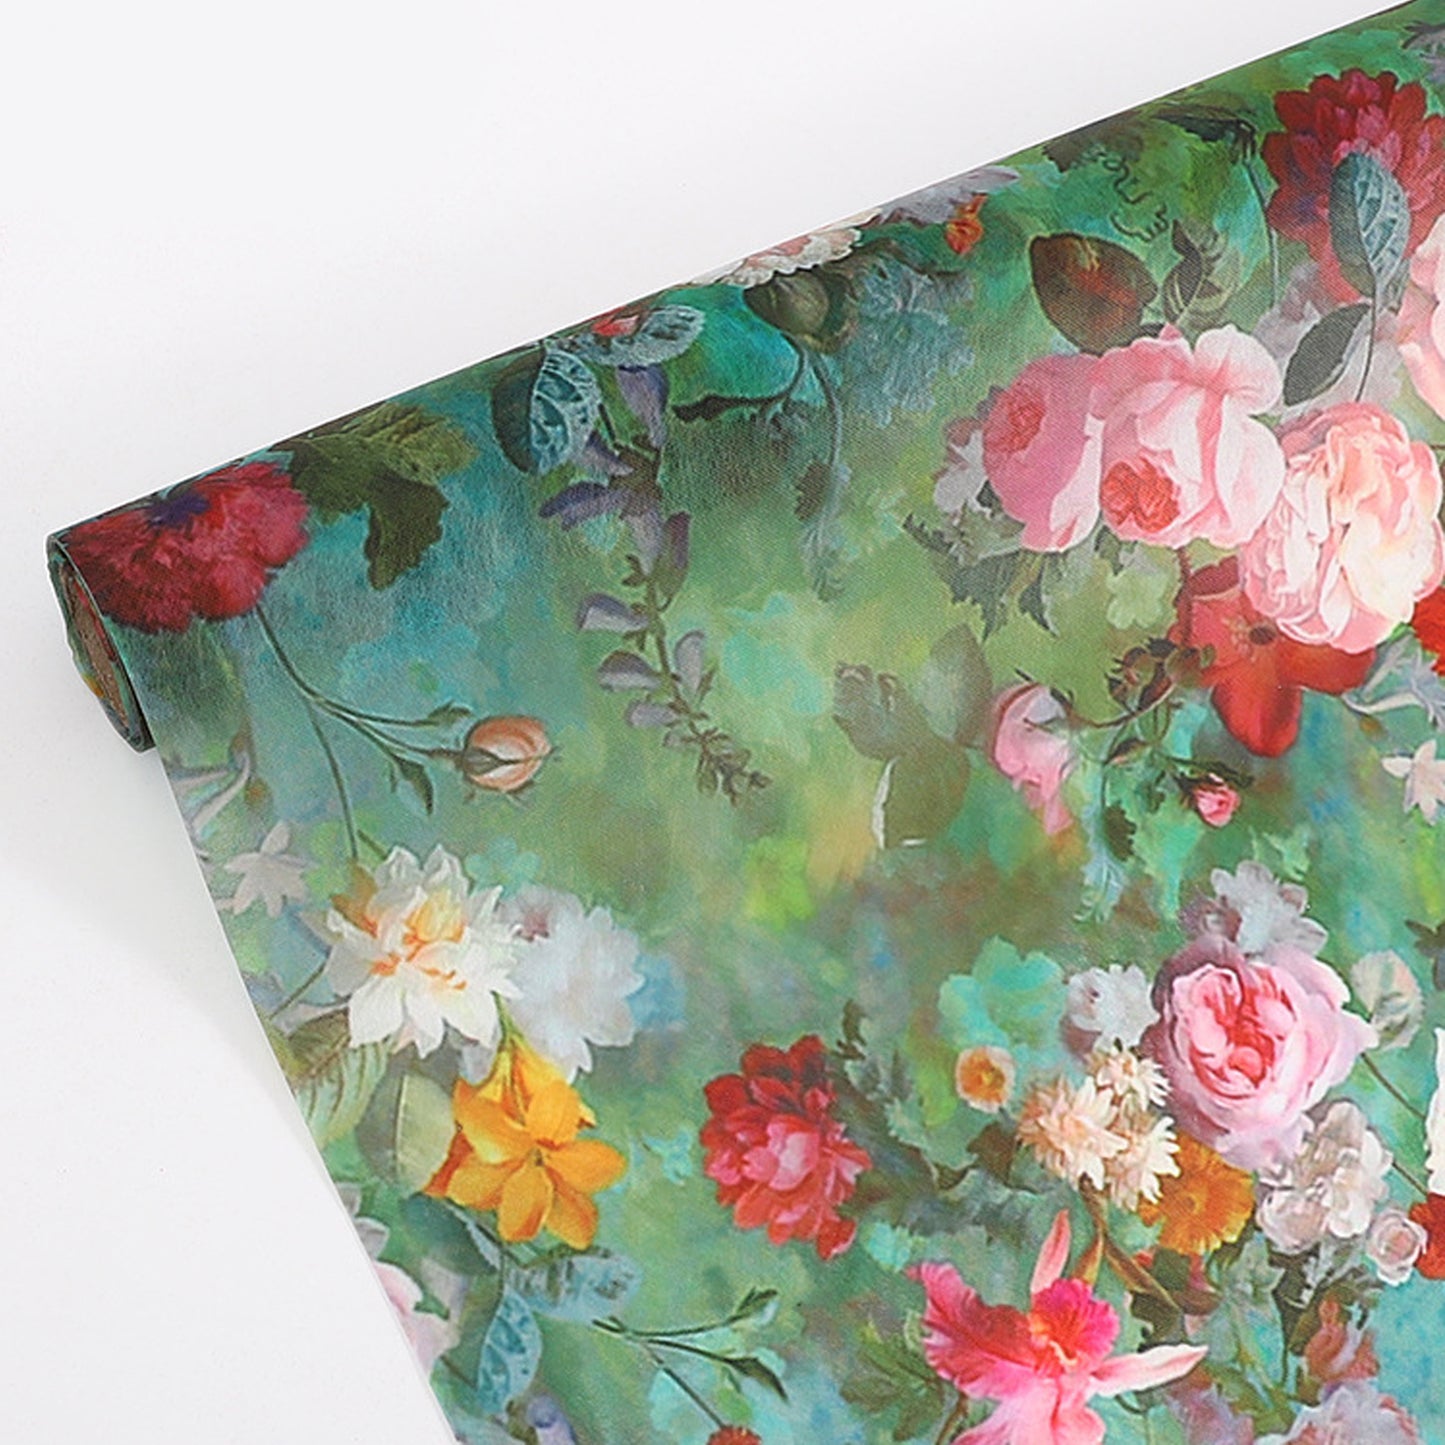 4Yards Vintage Floral Print Wrapping Paper Roll